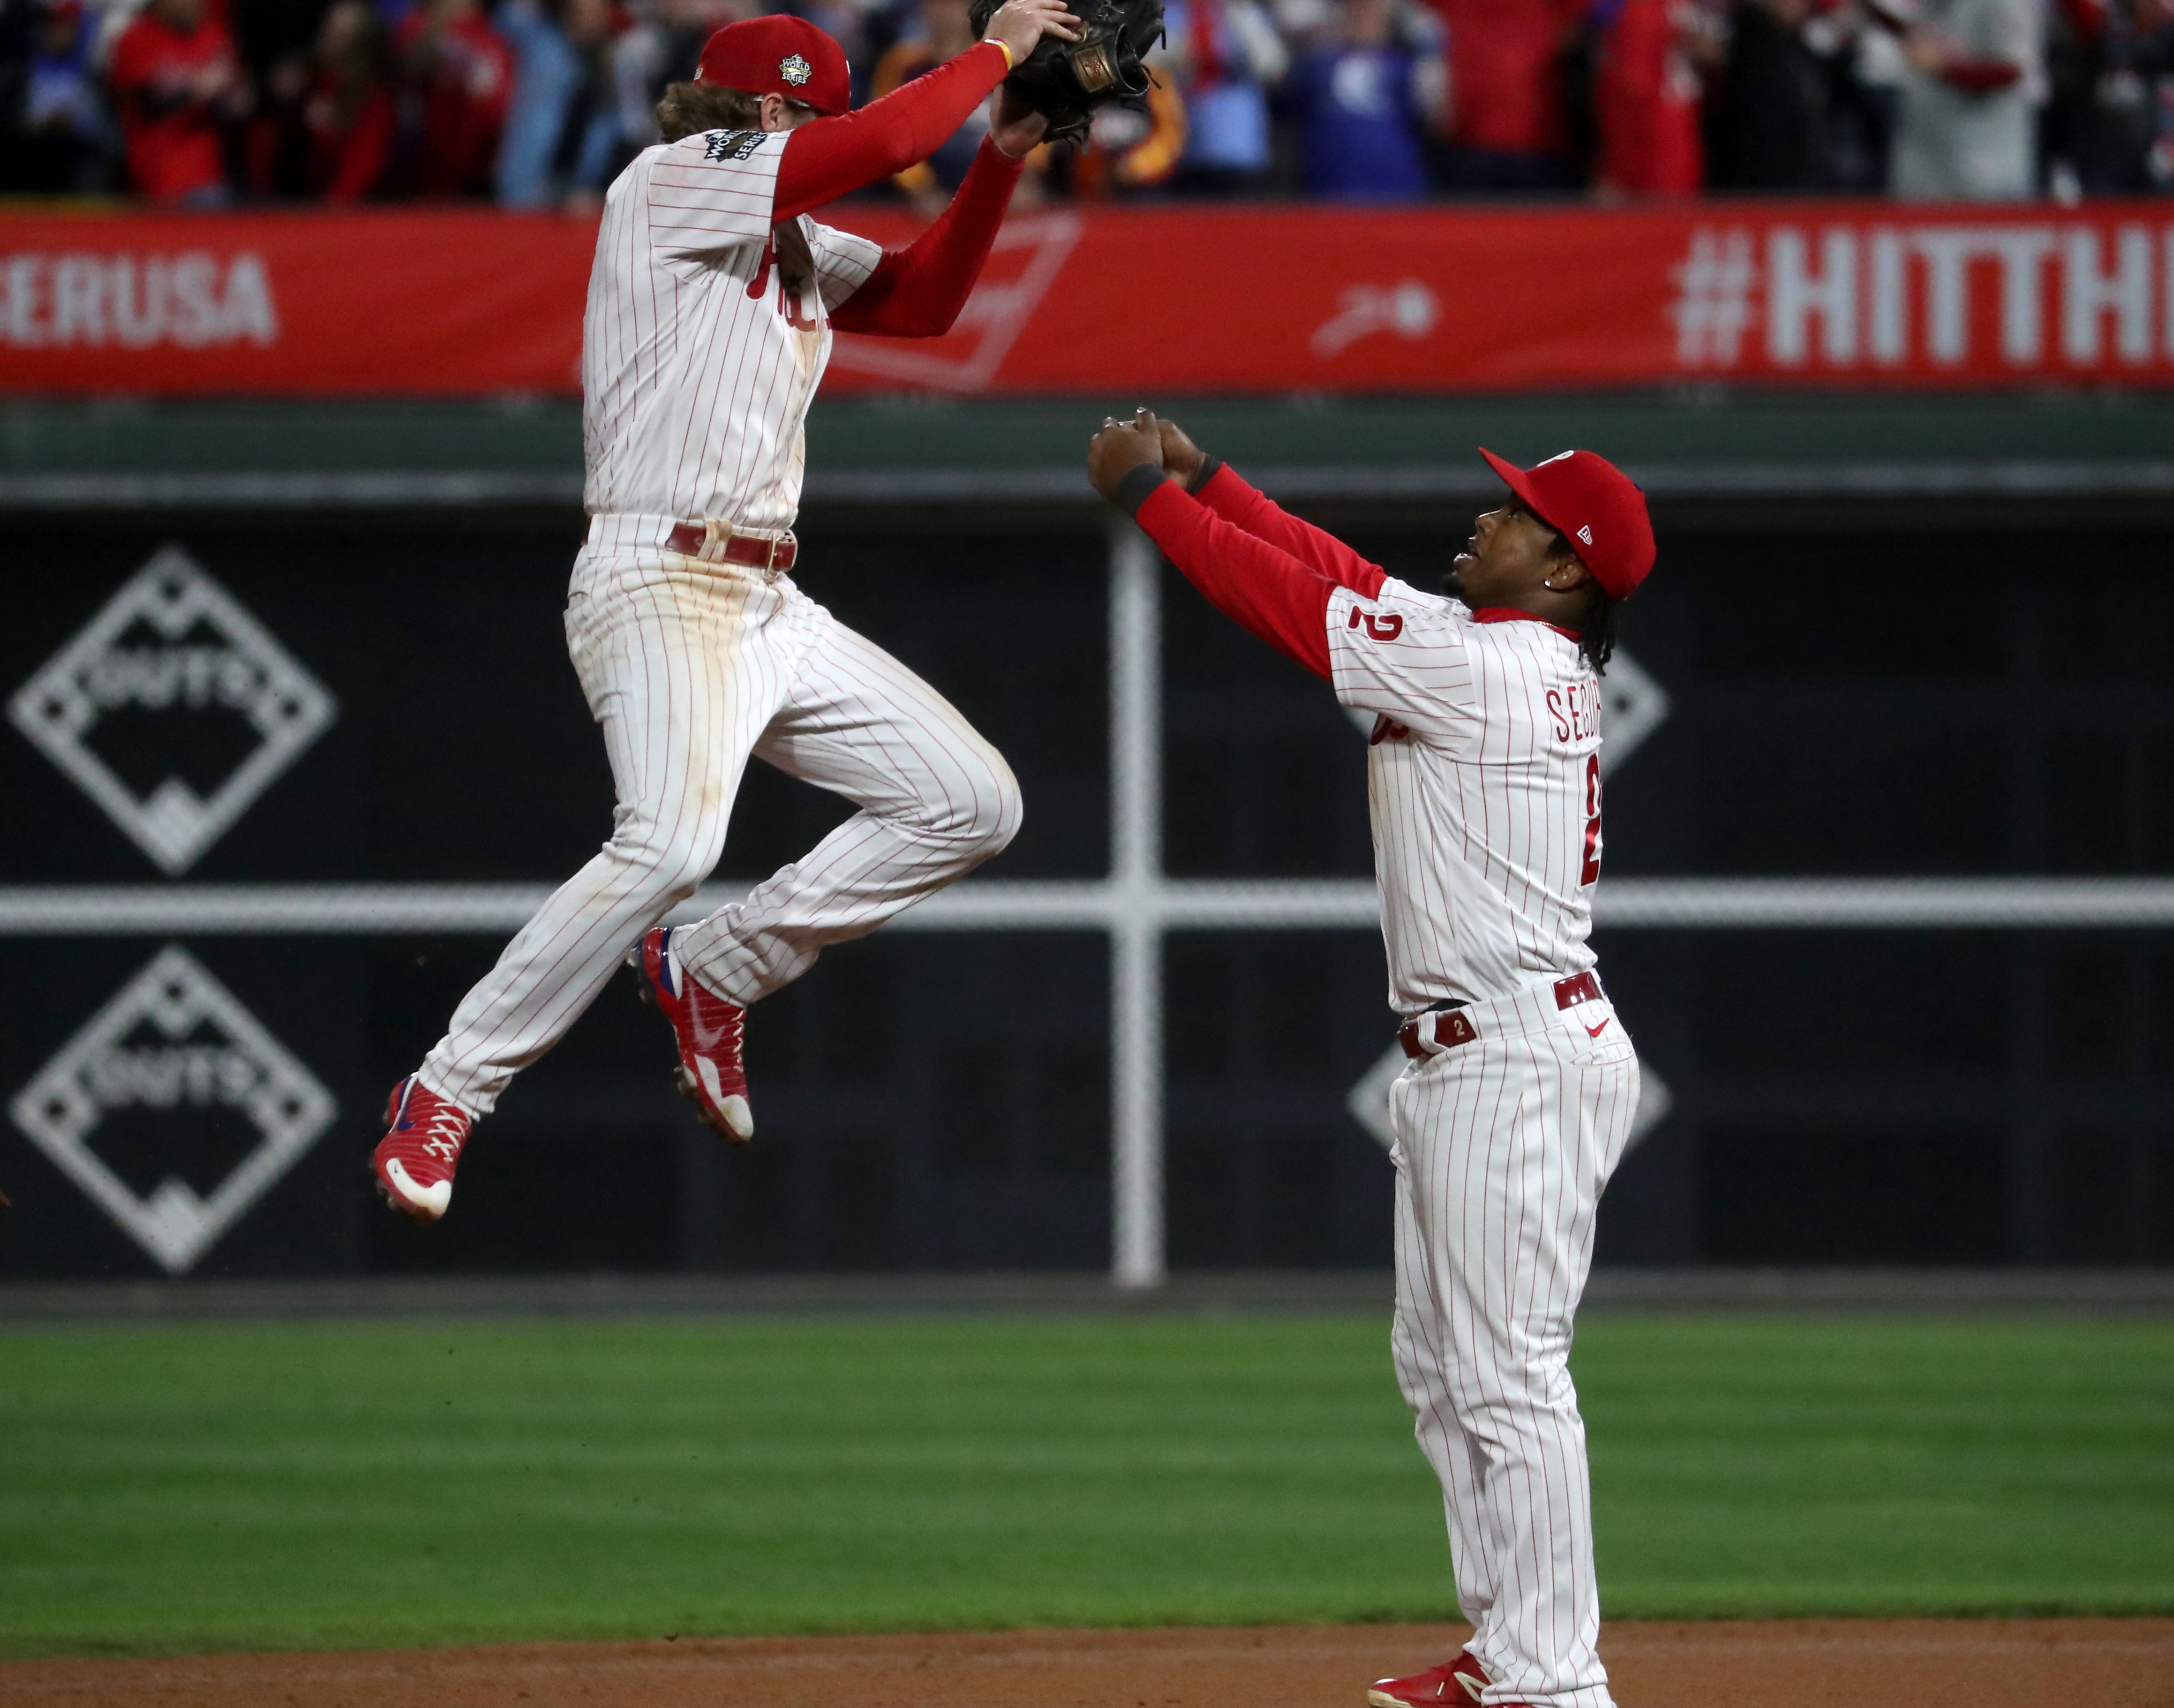 Bryson Stott (5) and Jean Segura (2) of the Philadelphia Phillies celebrate a 7-0 win during World Series Game 3 against the Houston Astros at Citizens Bank Park, Tuesday, Nov. 1, 2022.